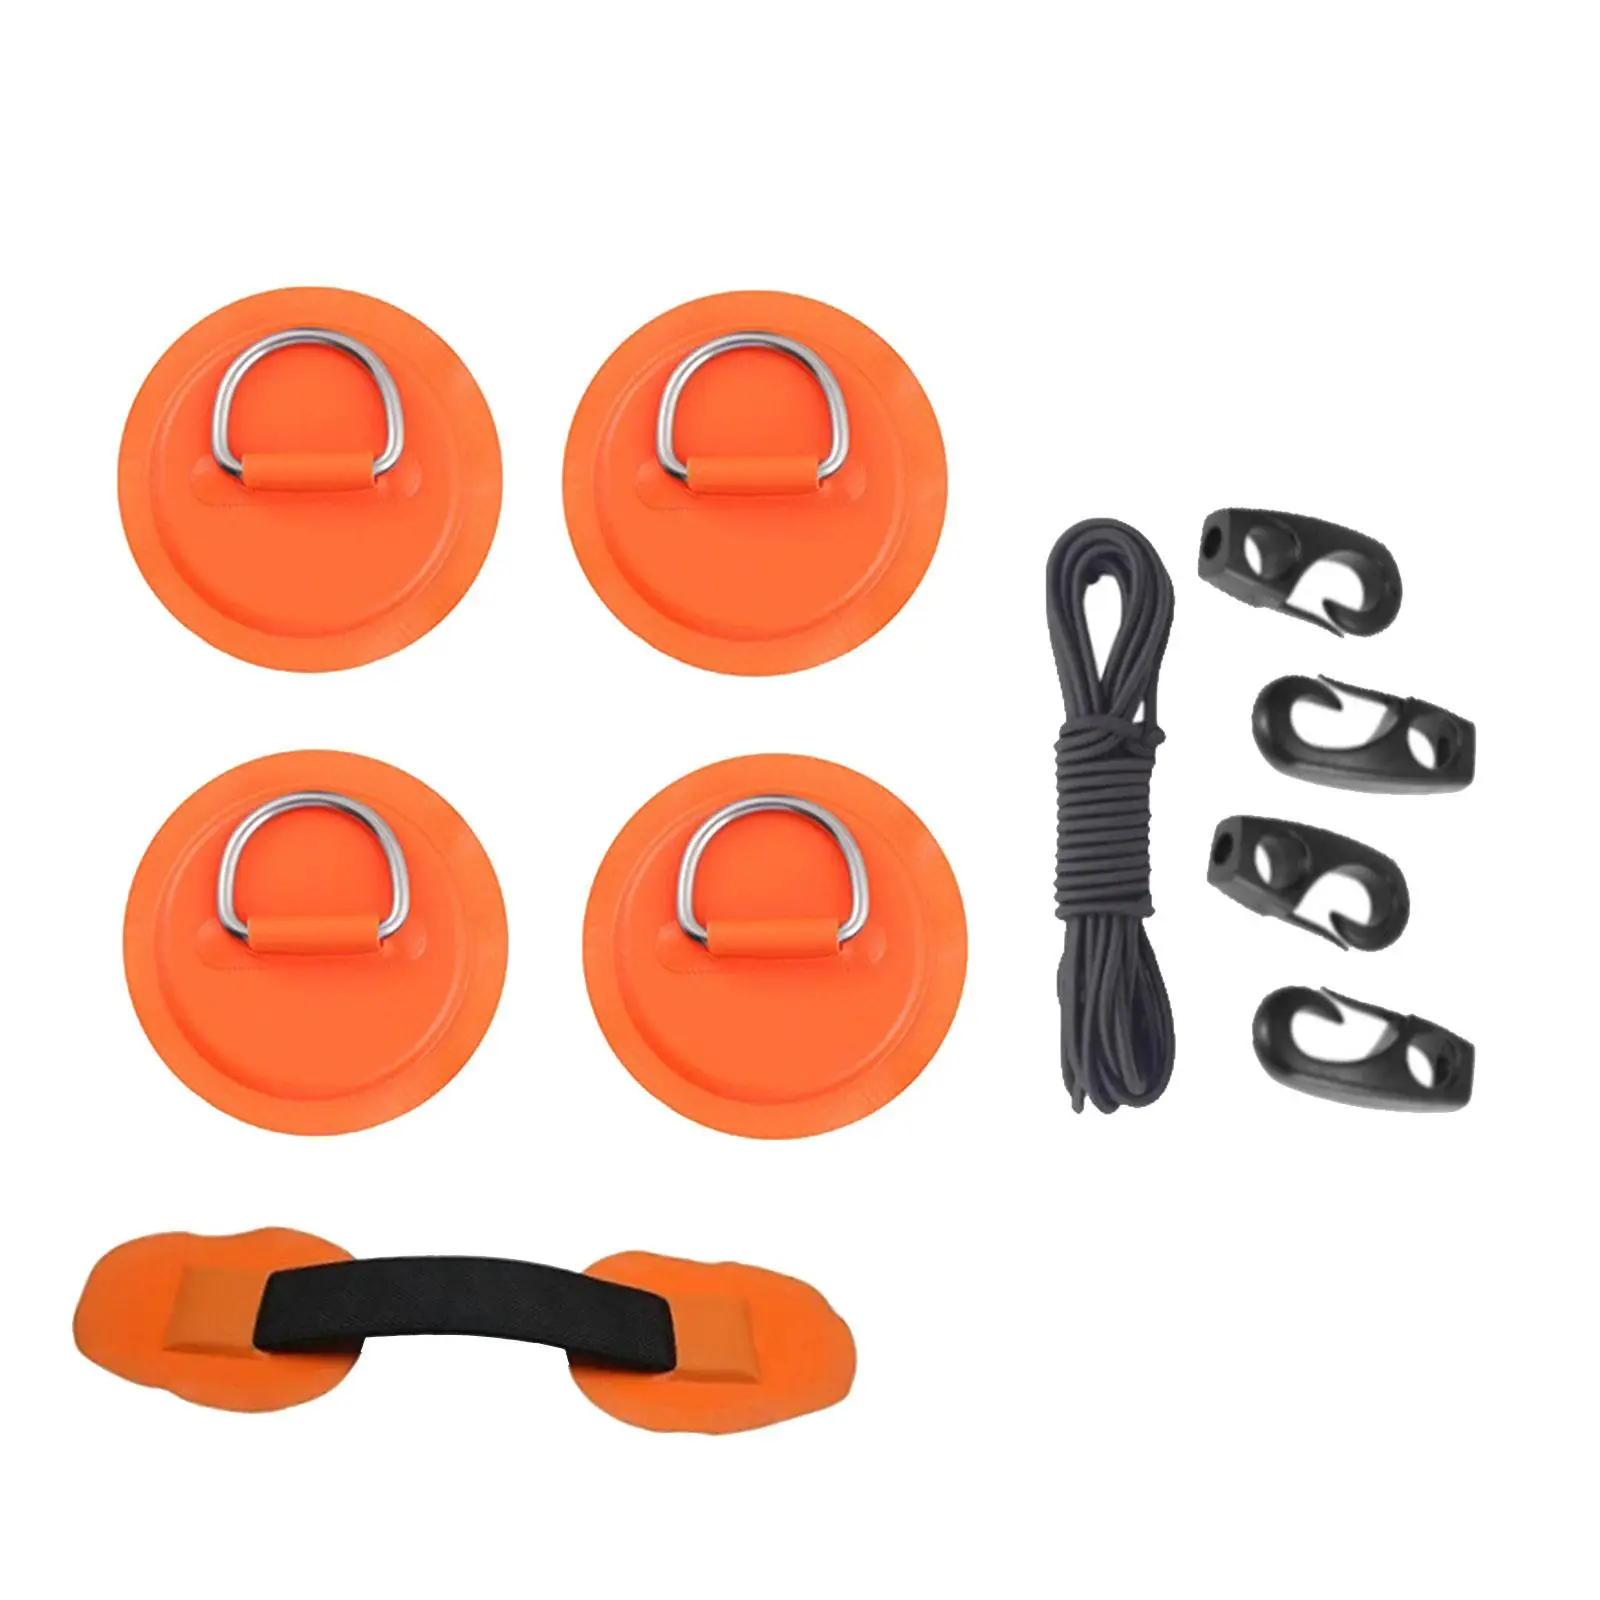 D Ring Pad Patch Bungee Accessories Set Round Patch for Inflatable Surfboard